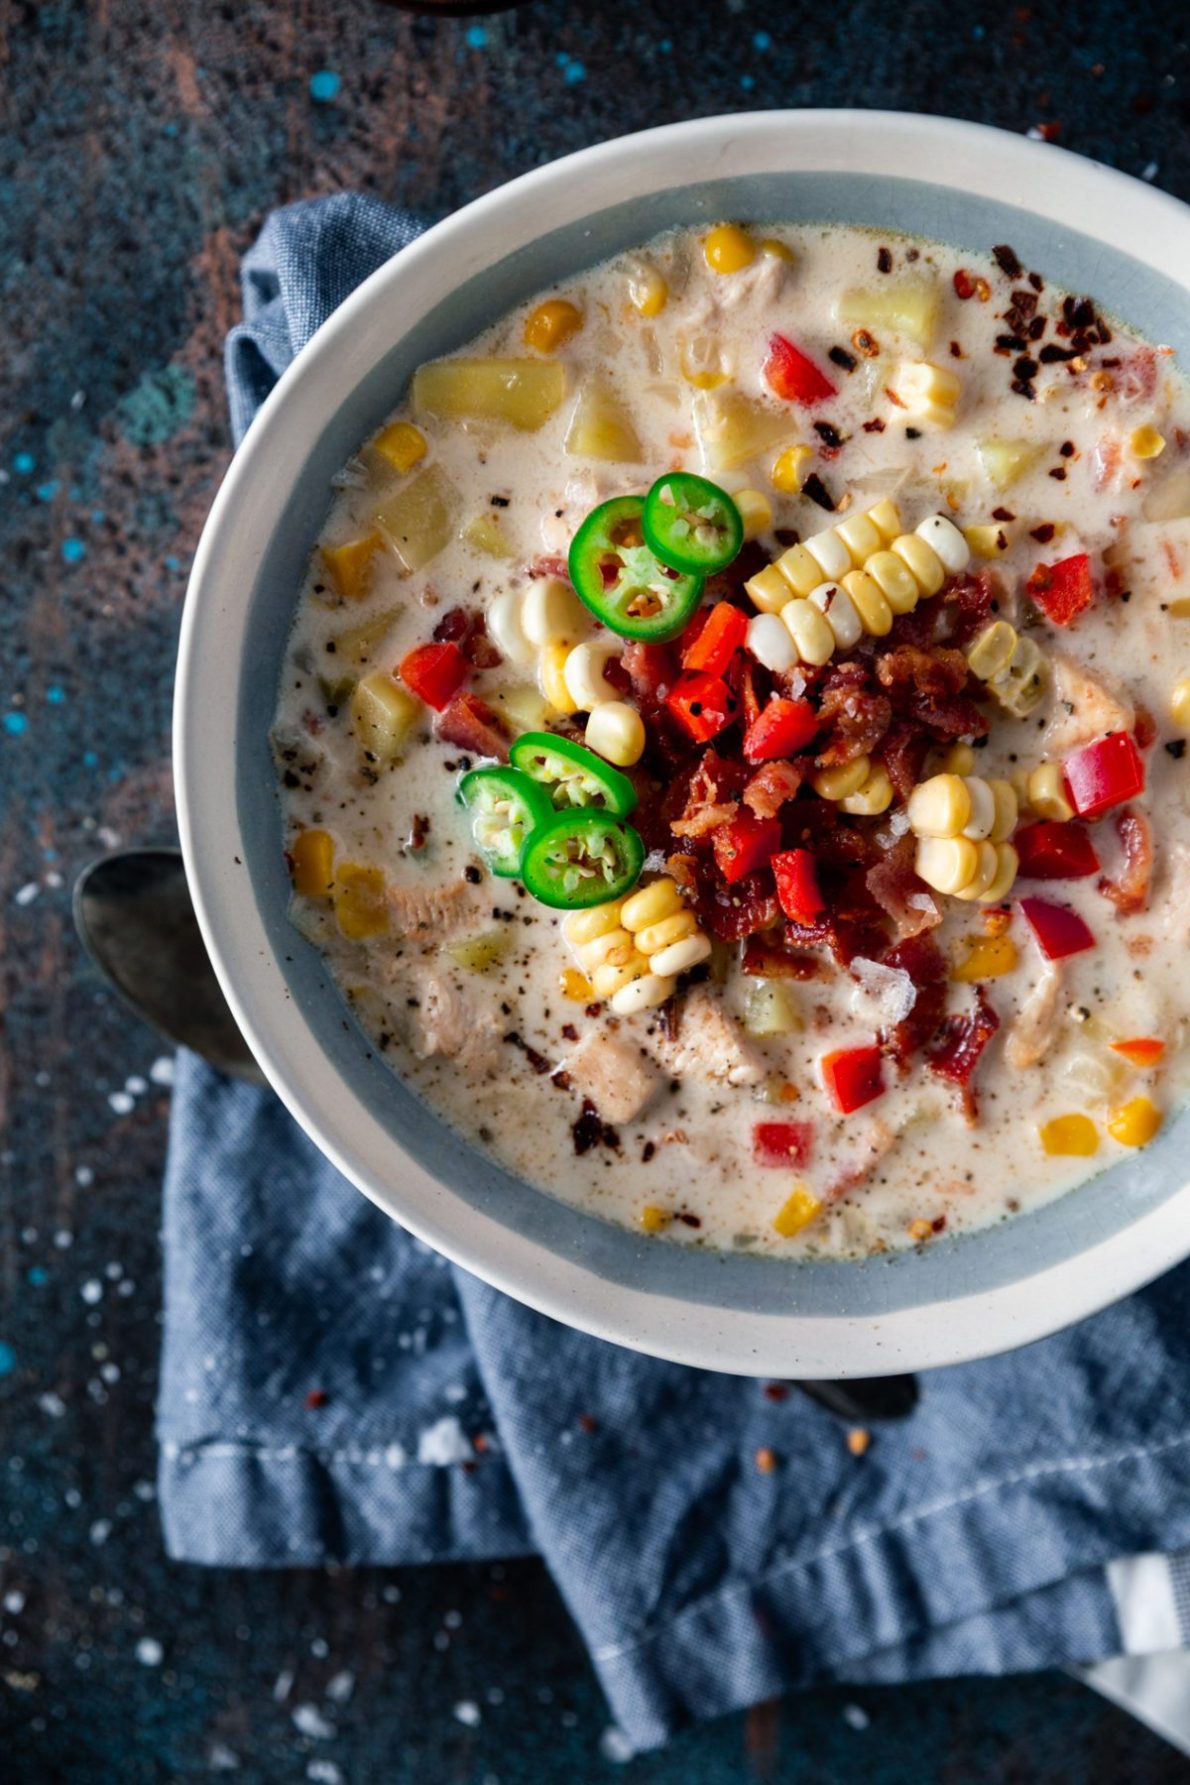 corn chowder is one of my favorite Comfort Food Recipes